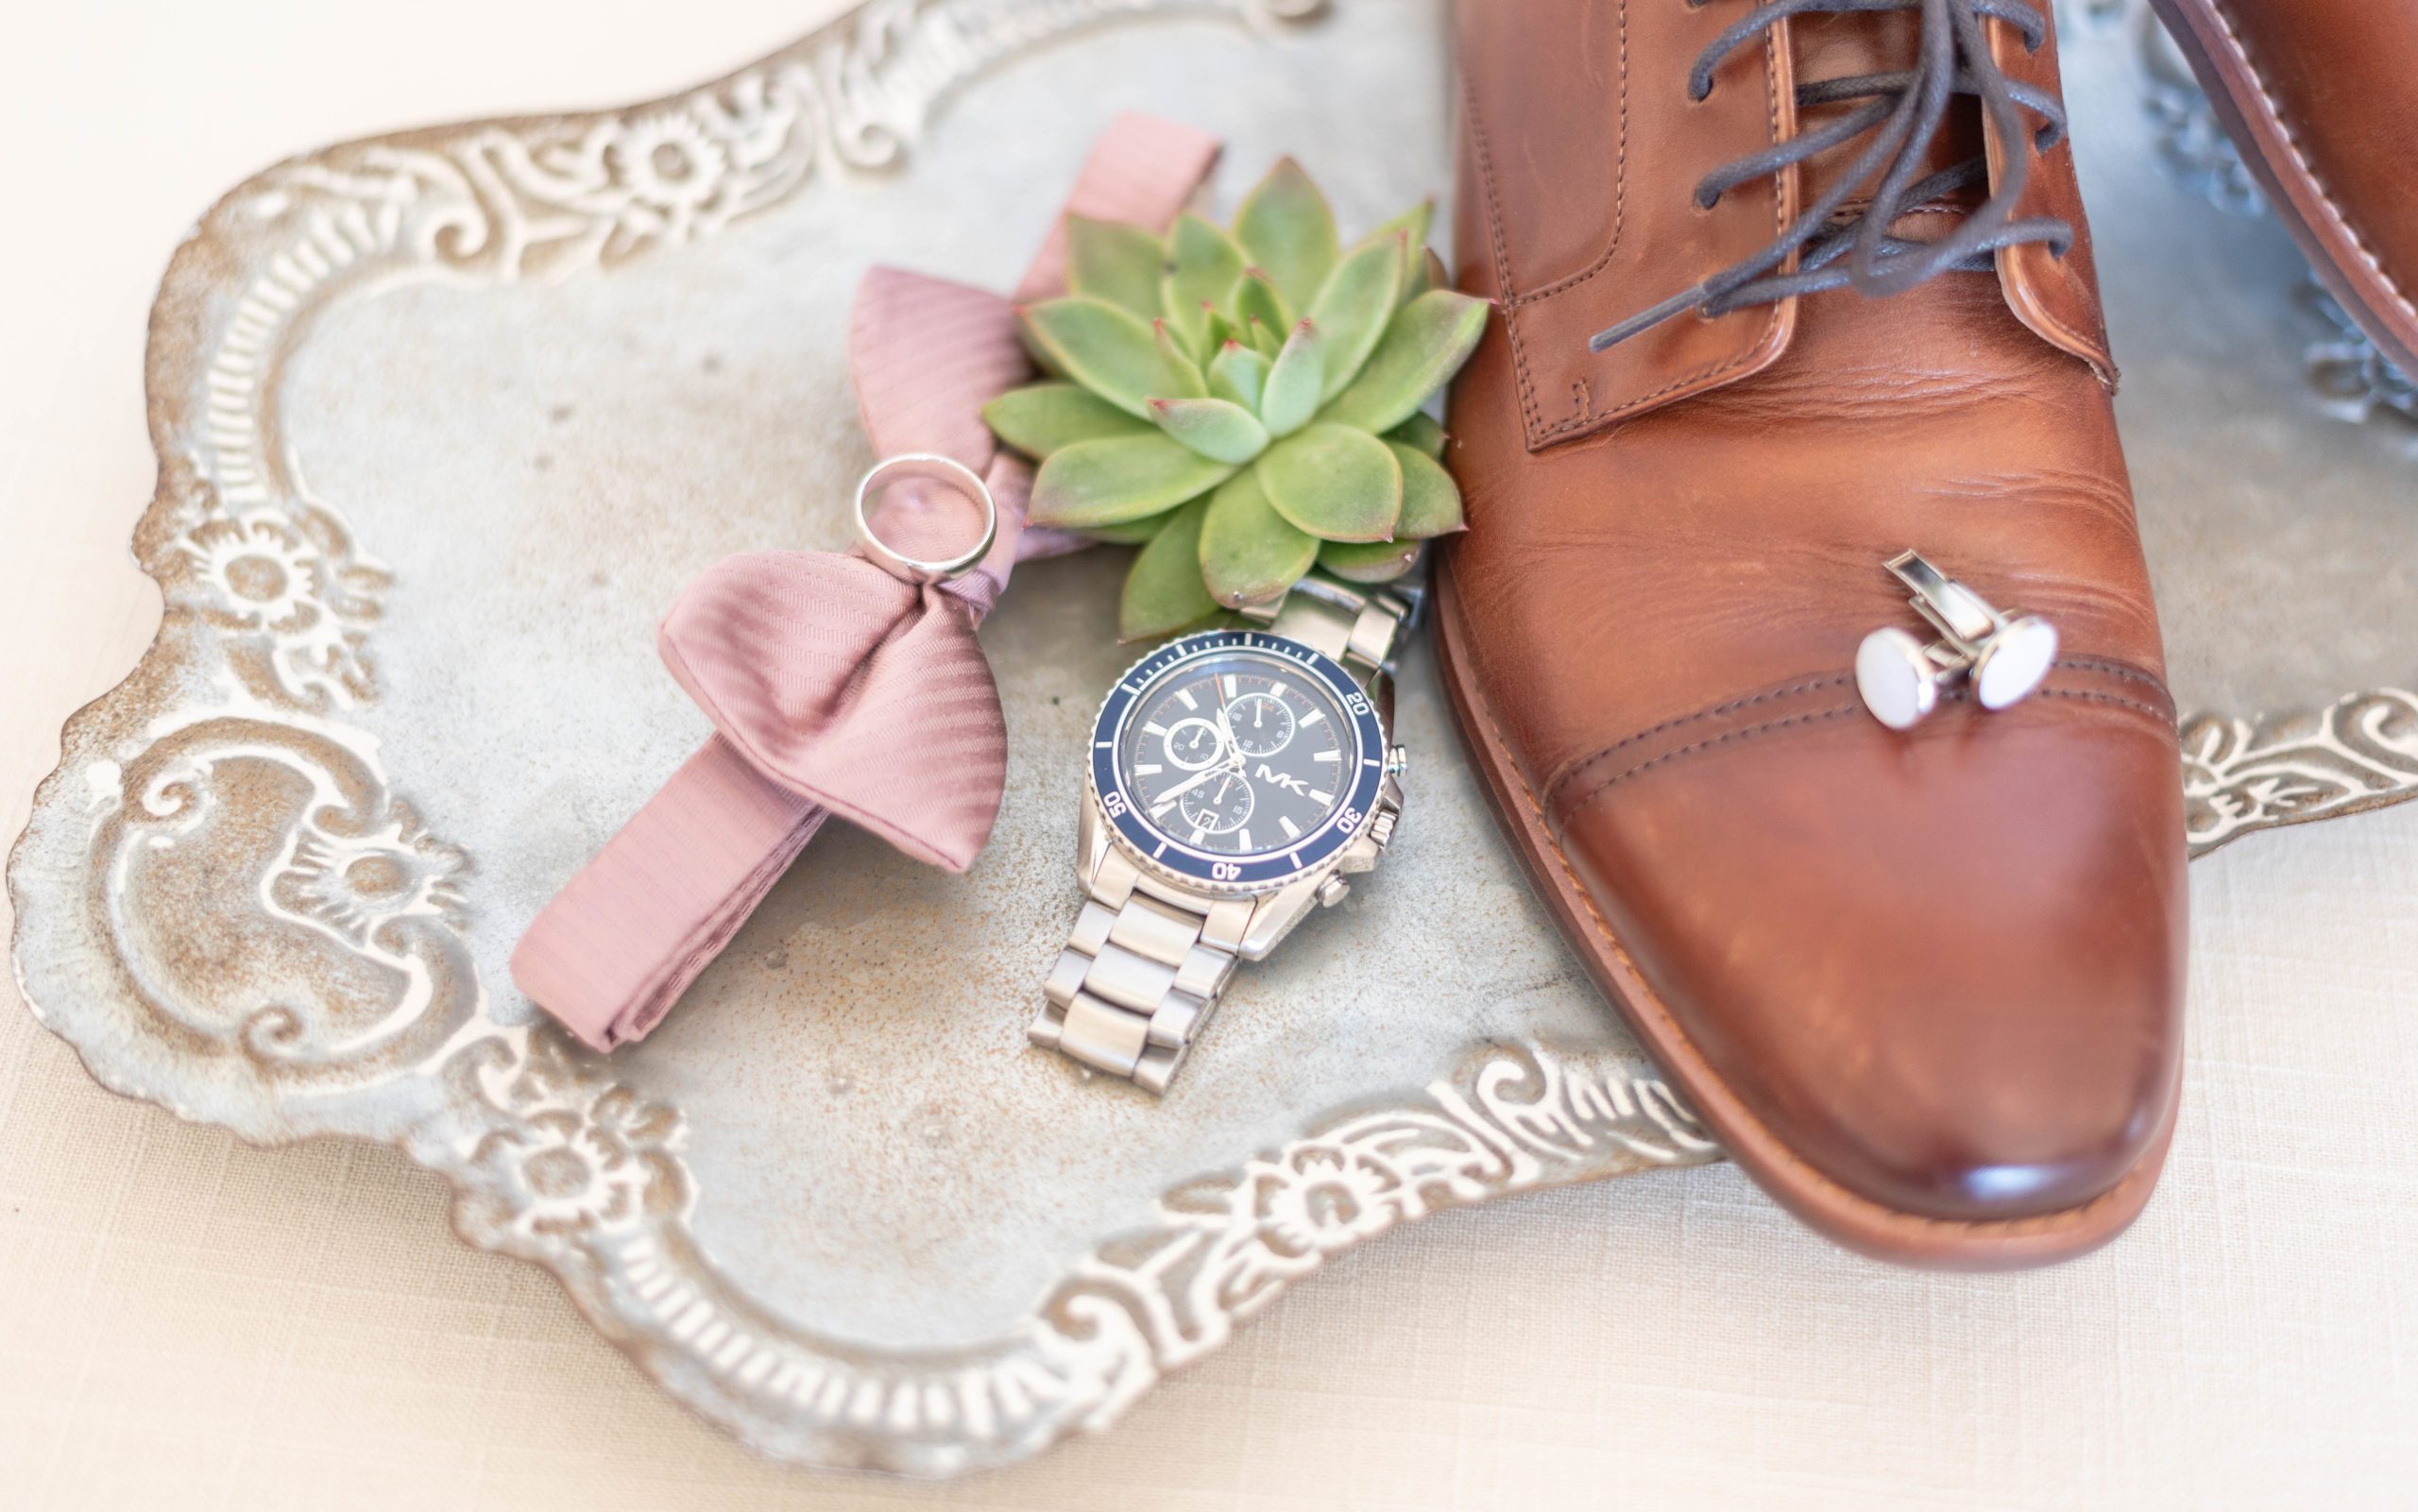 Groom wedding details such as shoes, watch and bow tie styled on a vintage tray